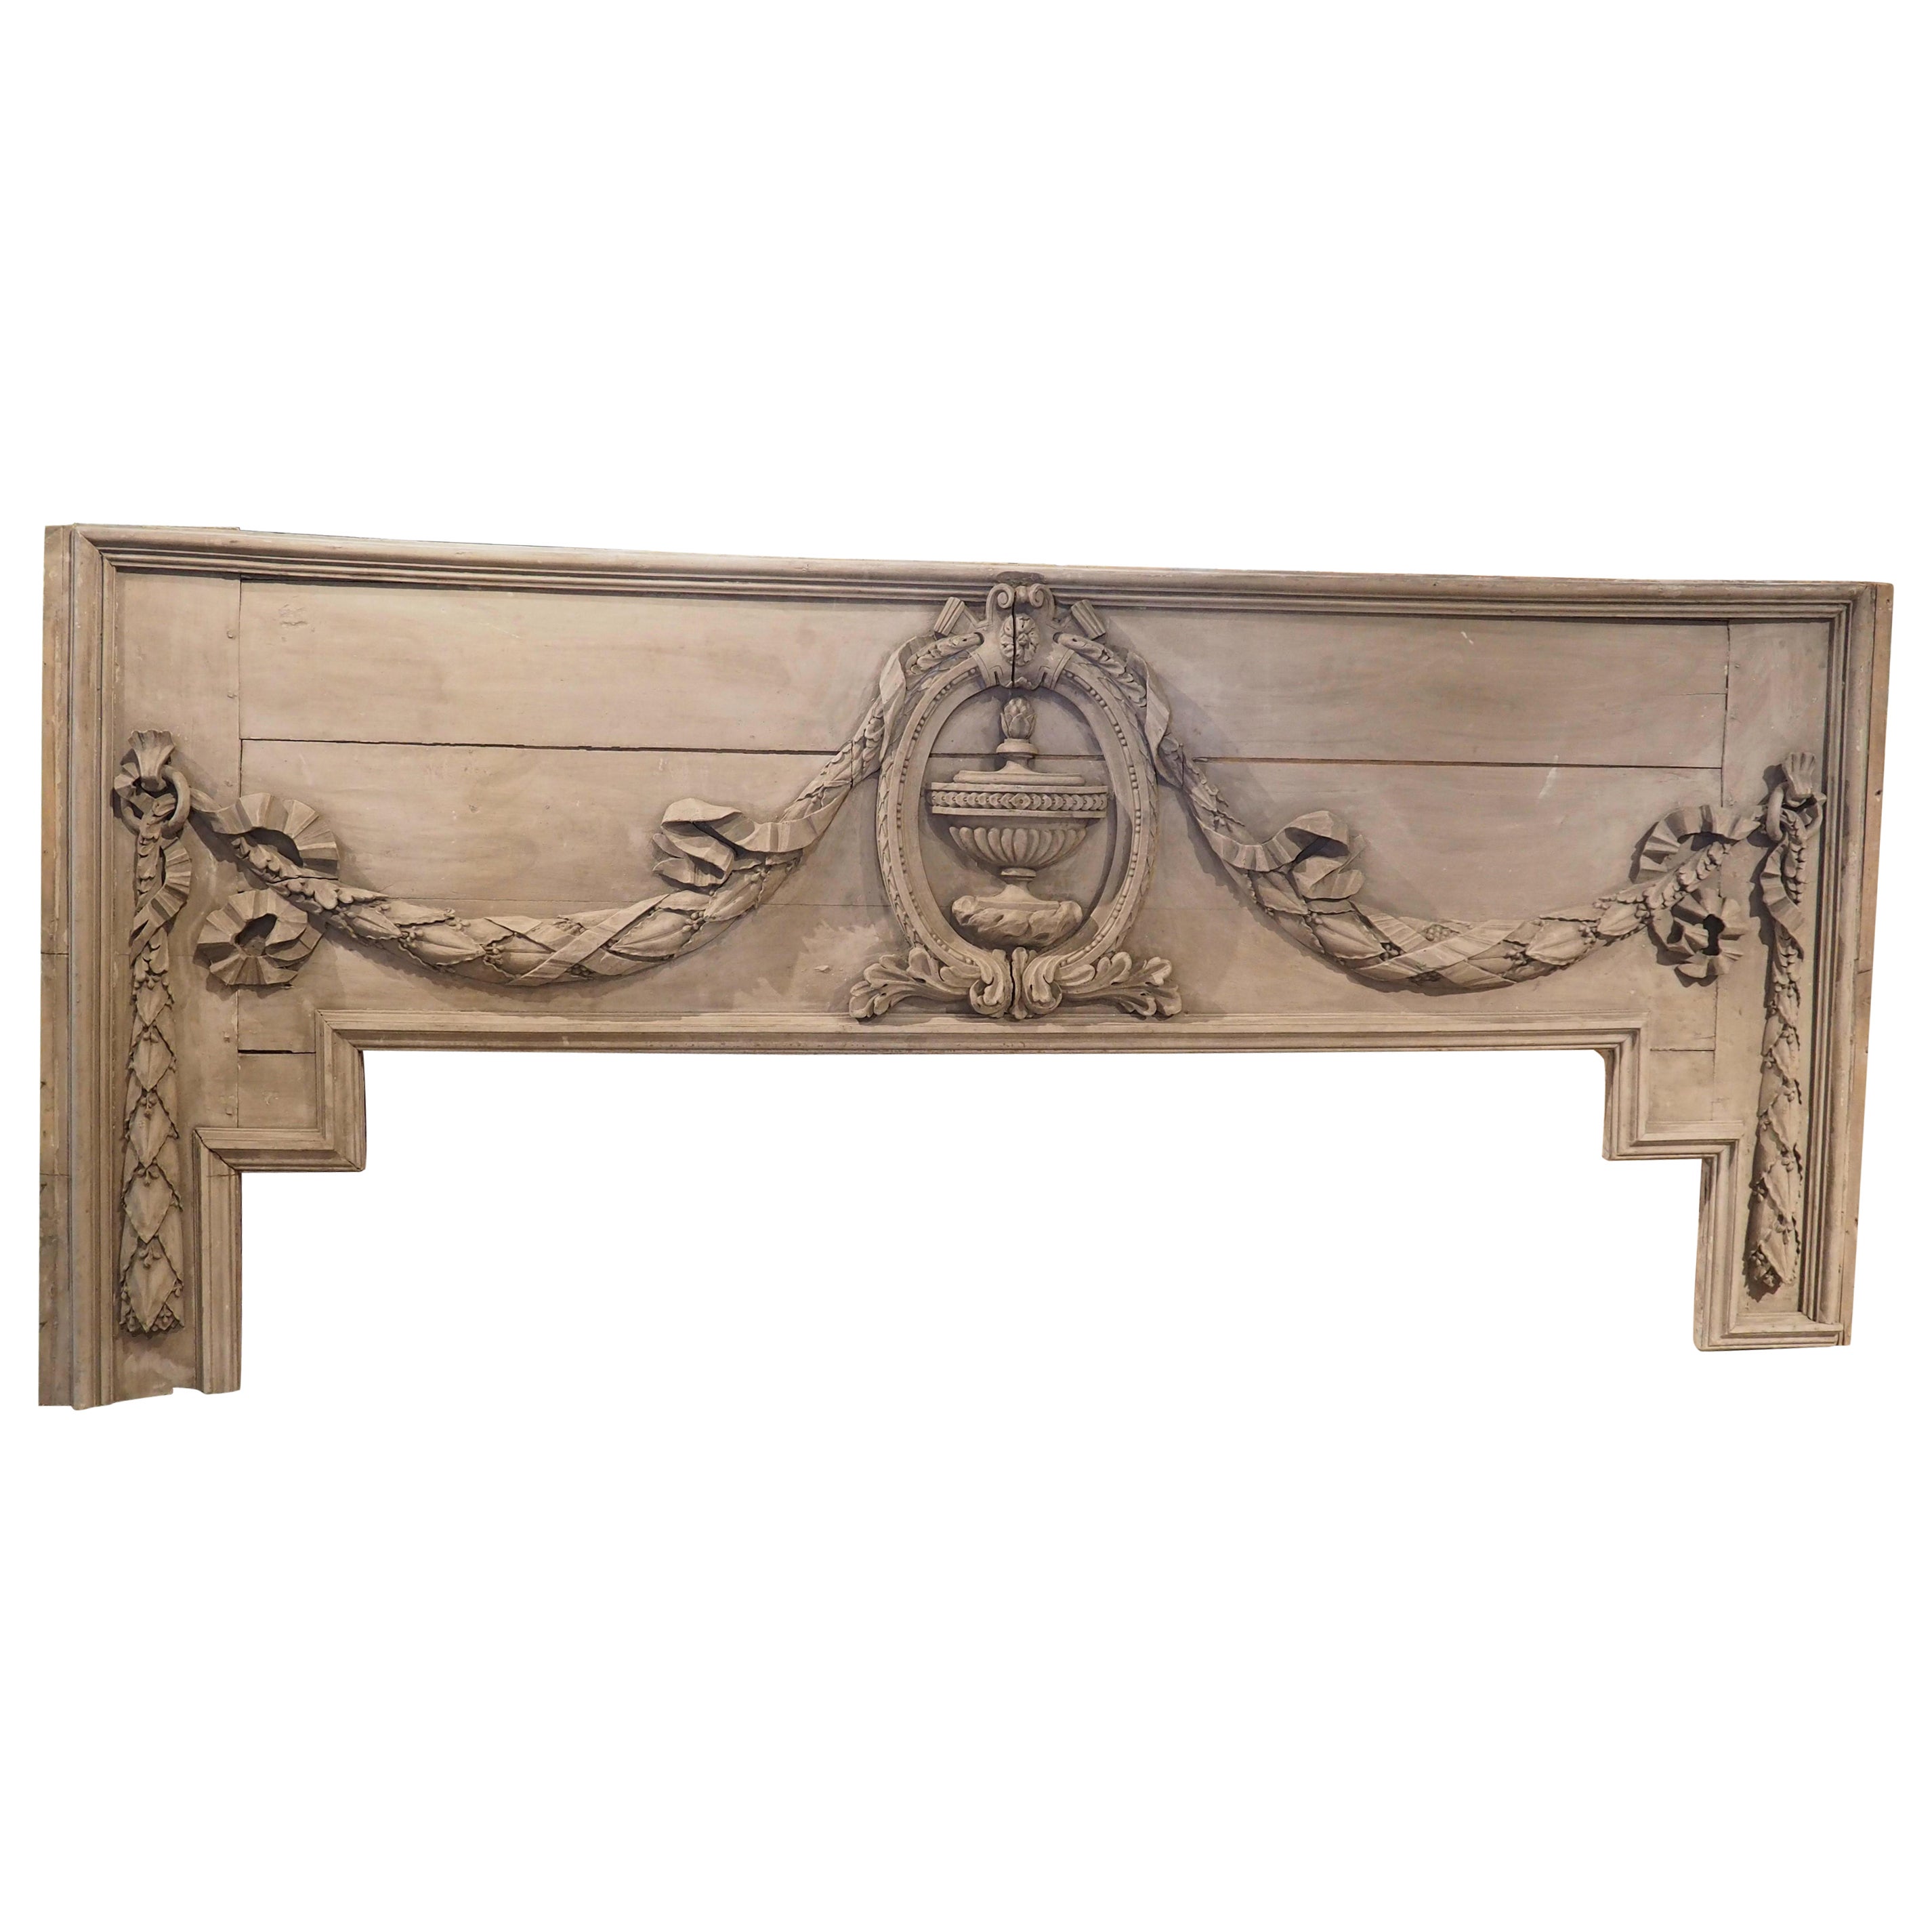 Large Period Louis XVI French Painted Overdoor or Headboard, circa 1790